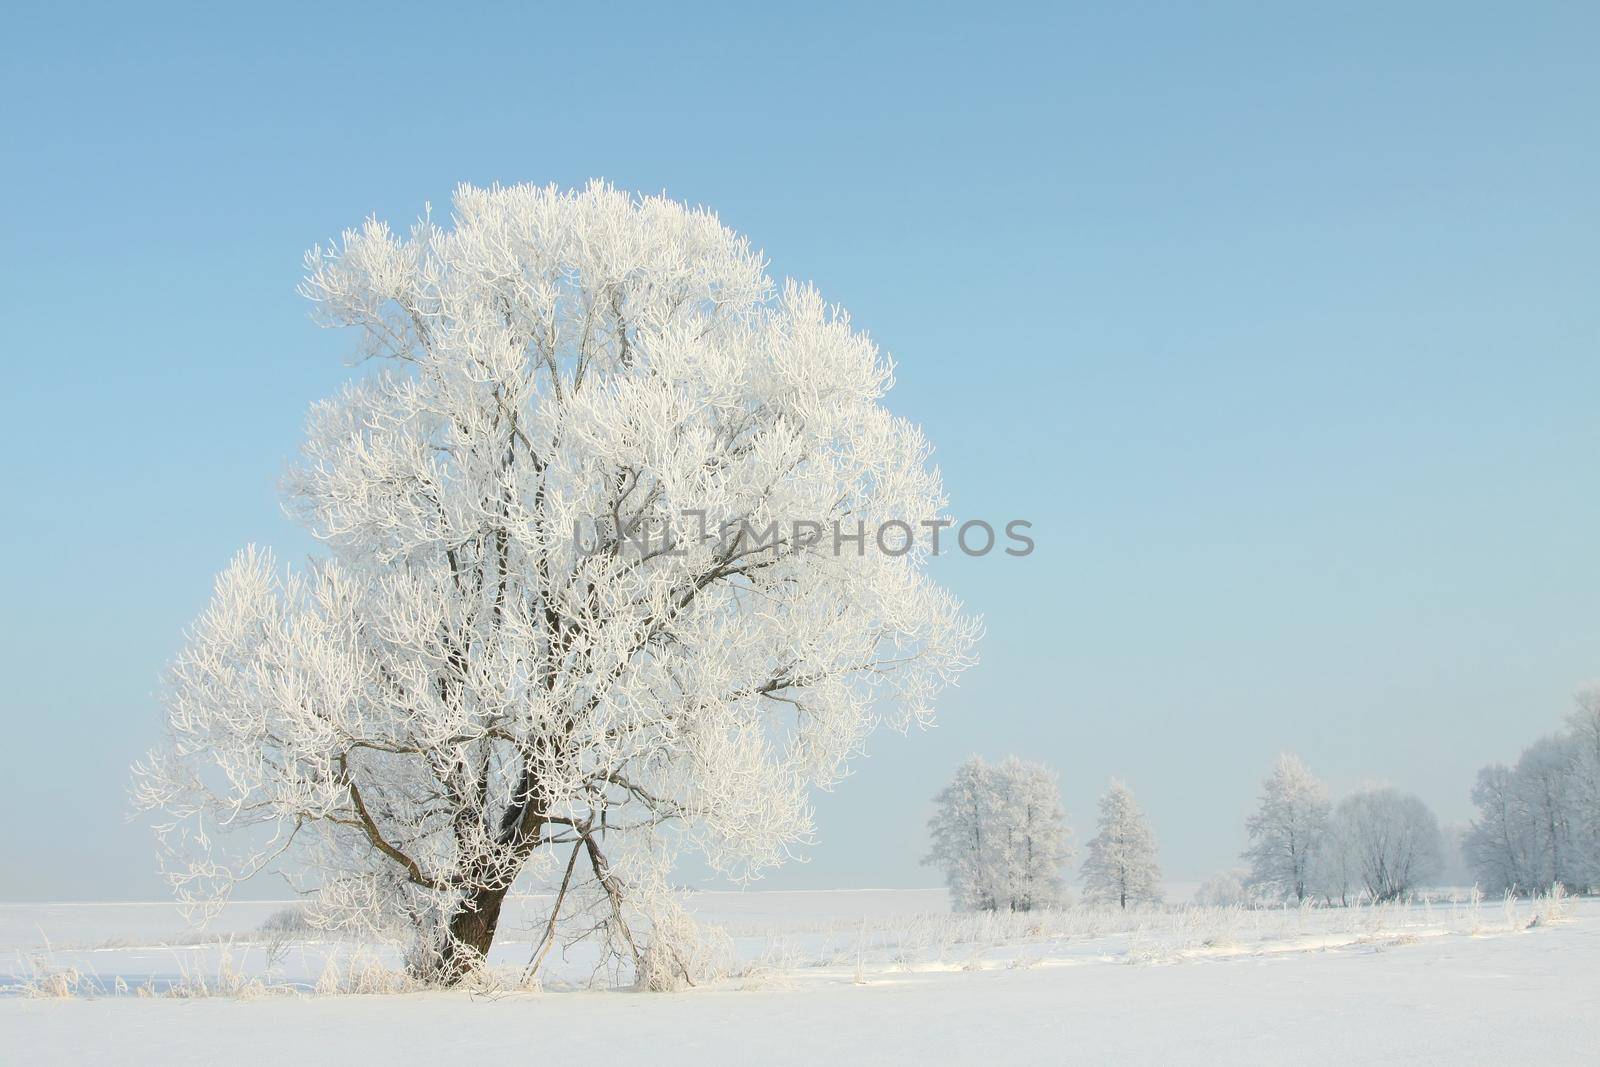 Frosty winter trees against the blue sky at sunrise.